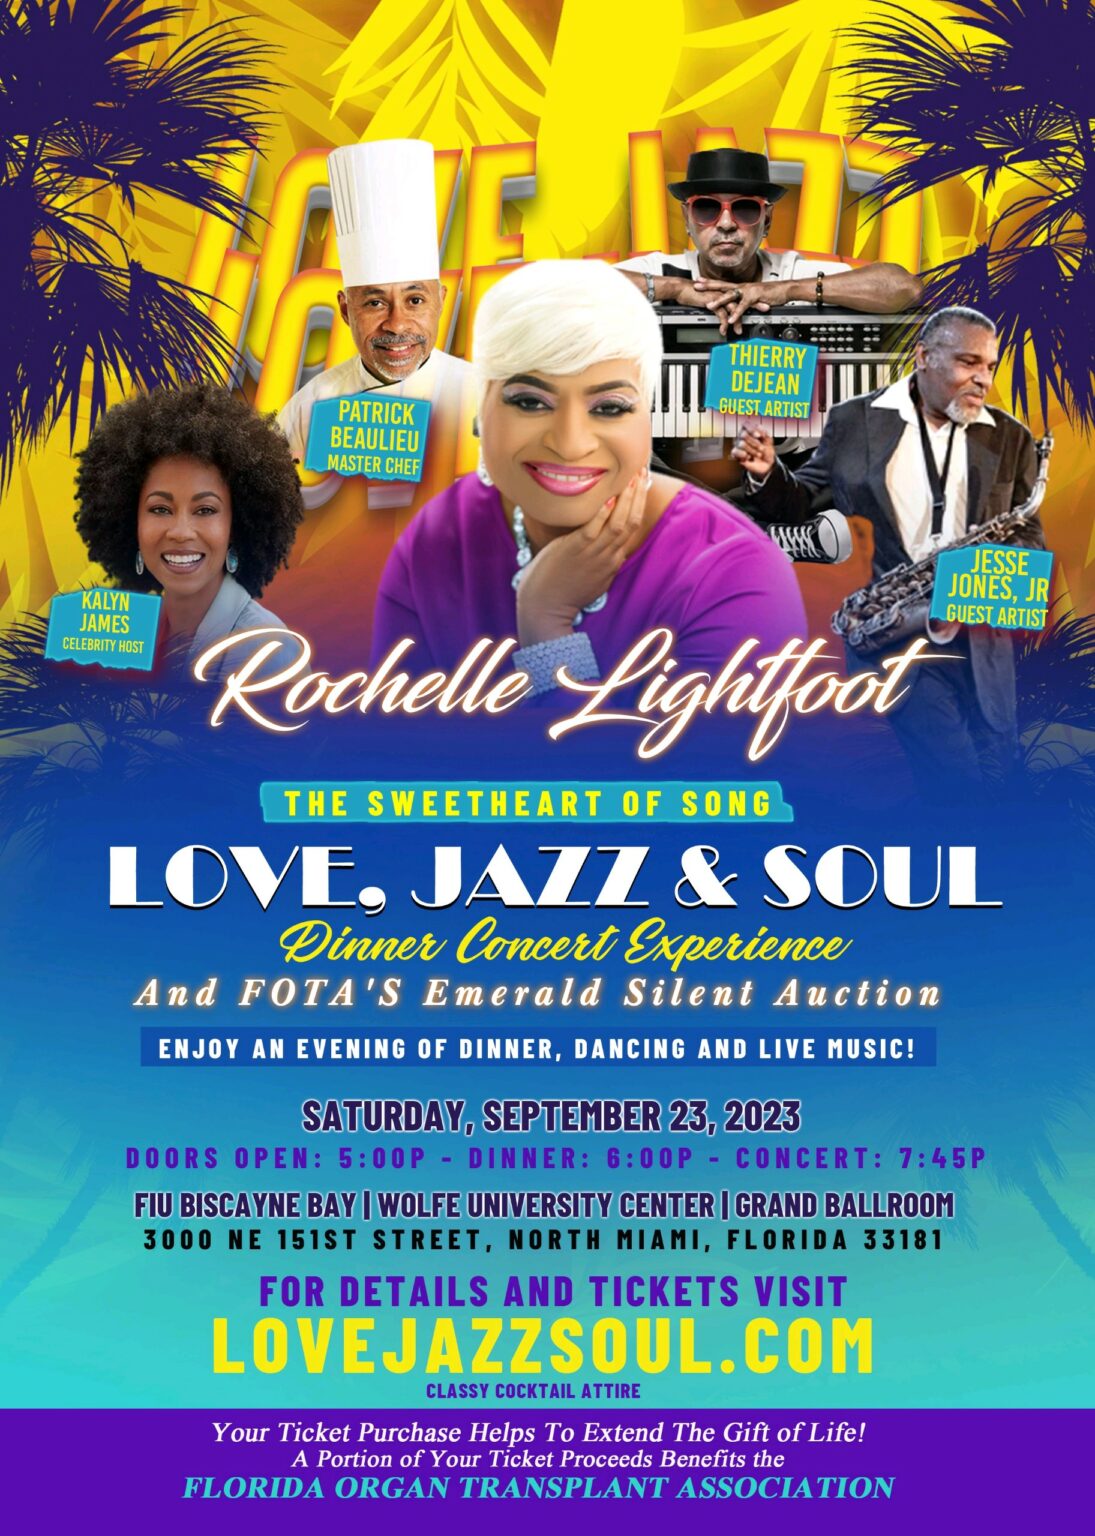 The Soul Of Miami – What are you doing tonight?